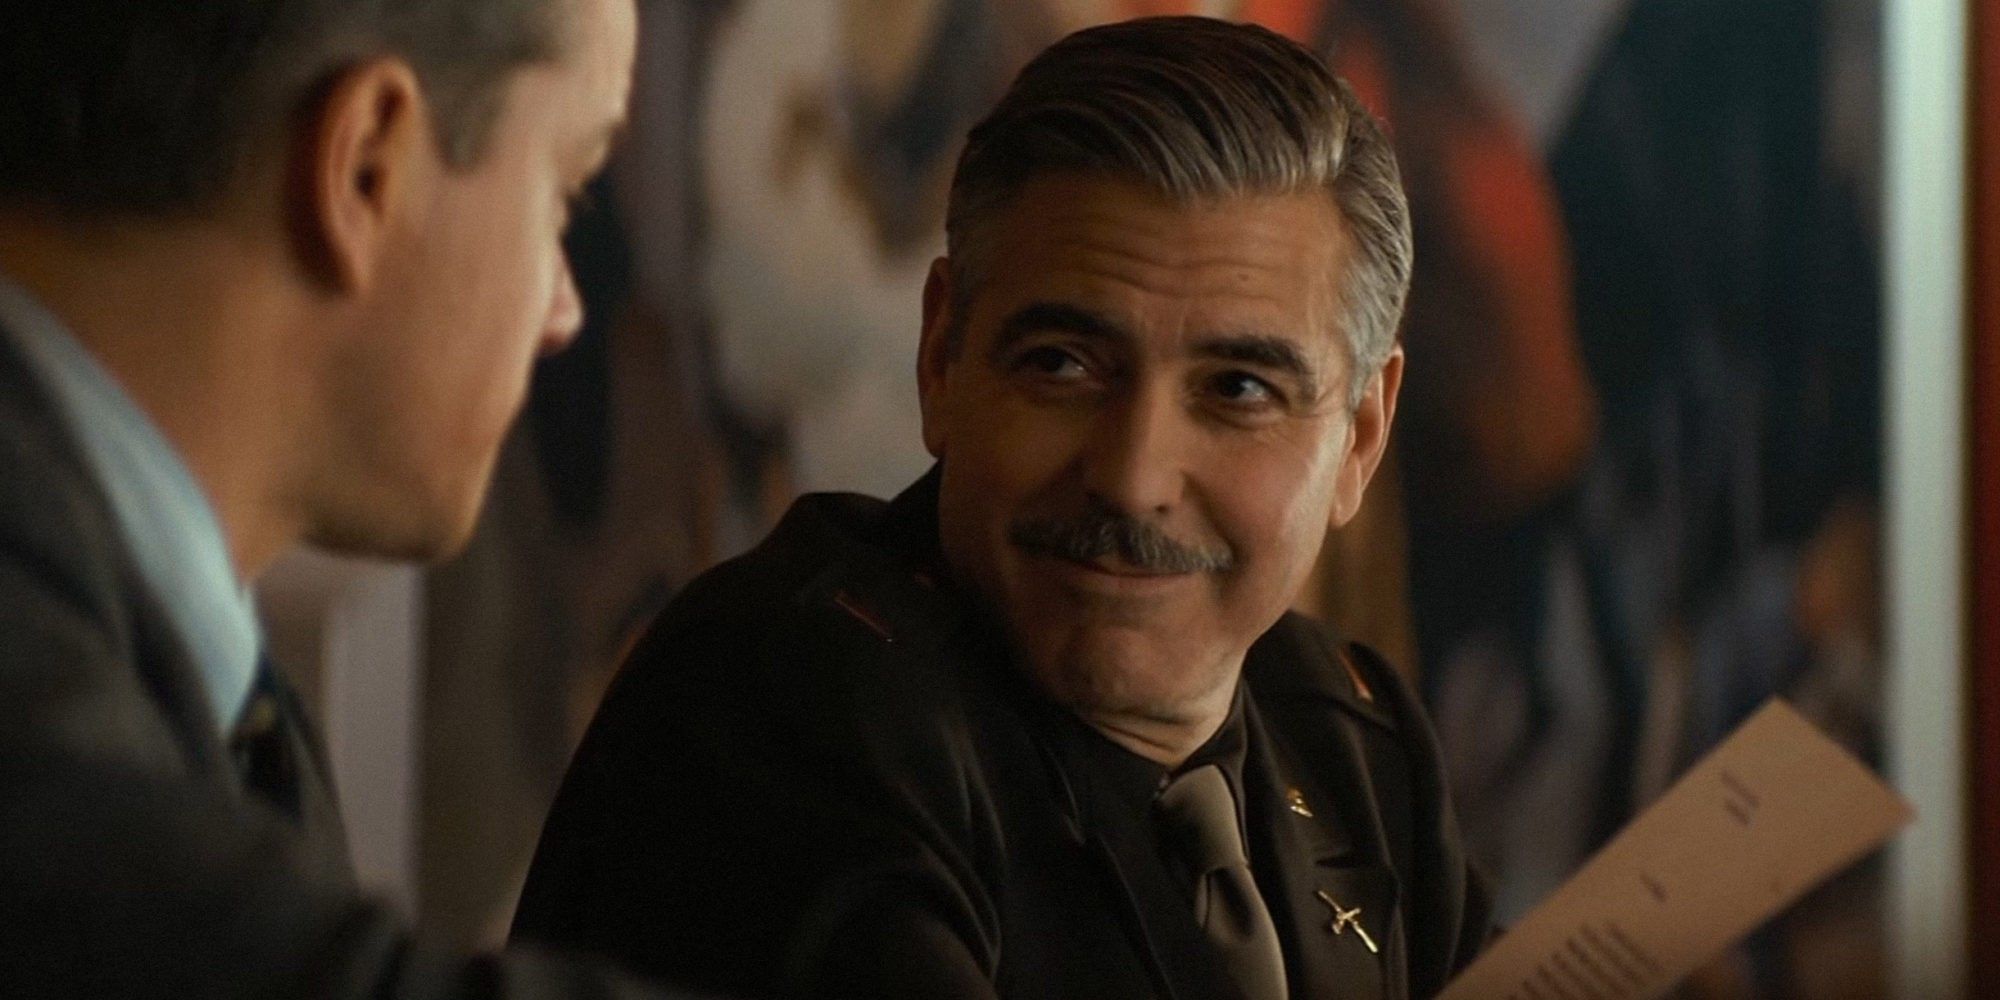 George Clooney as Frank Stokes grinning in The Monuments Men